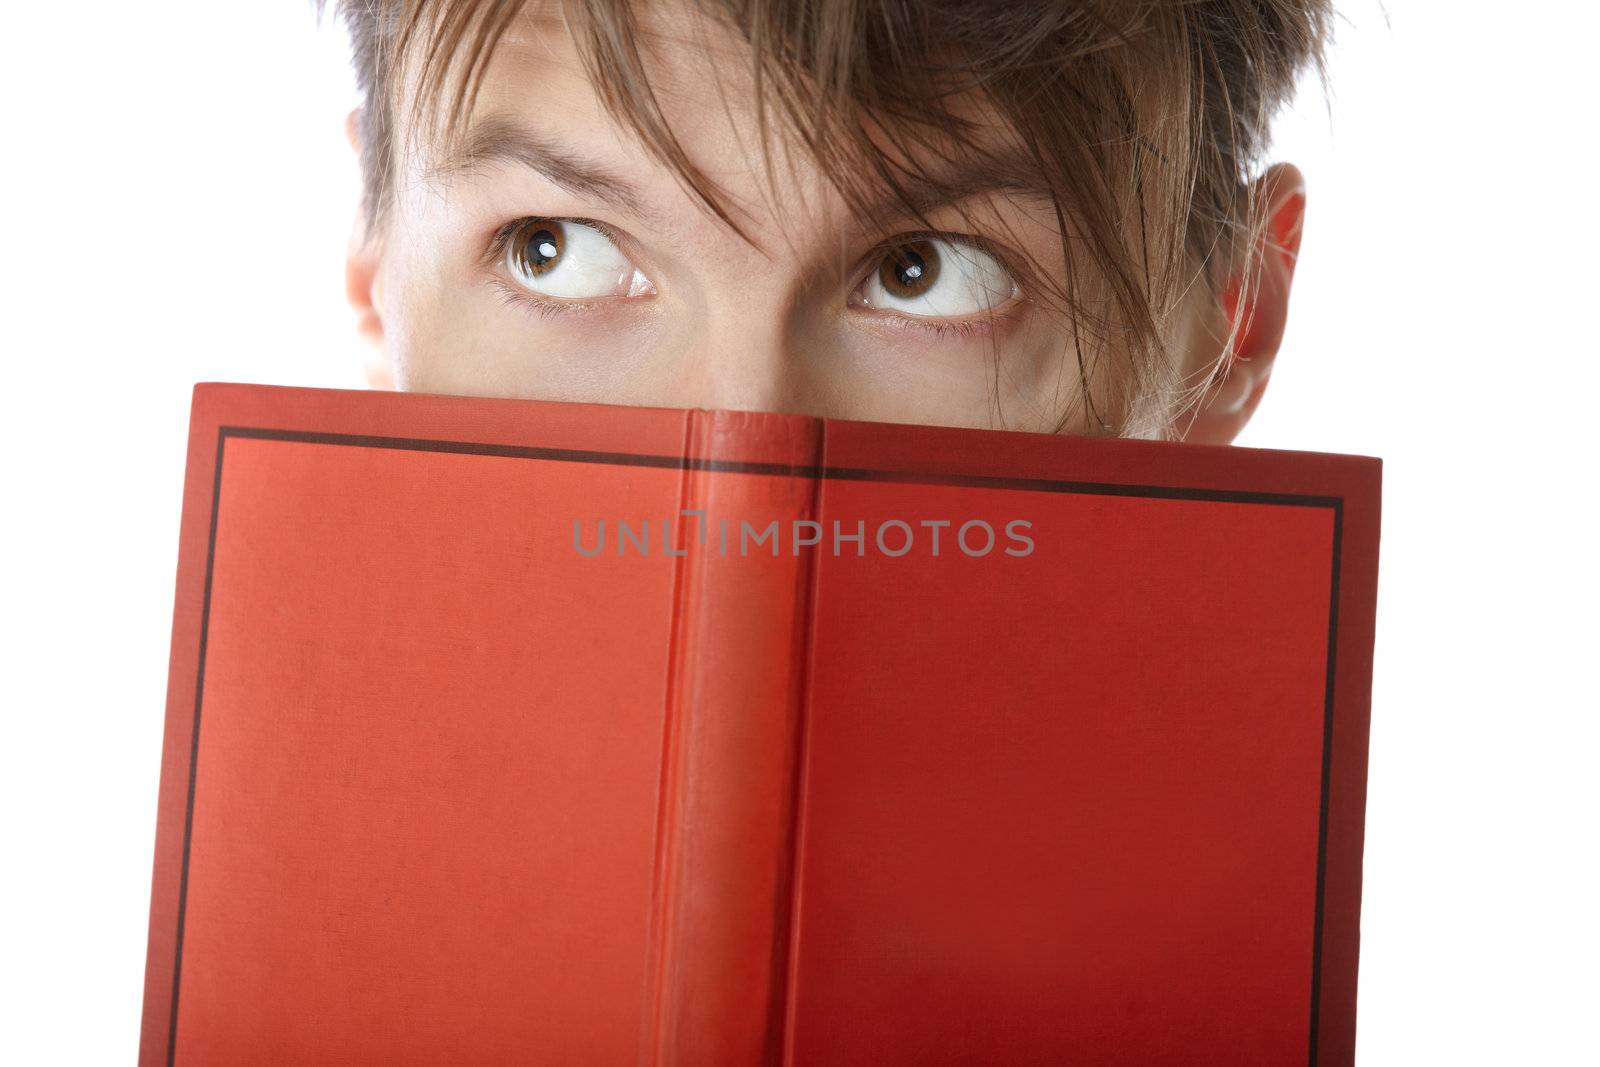 Young man holding red book on a white background